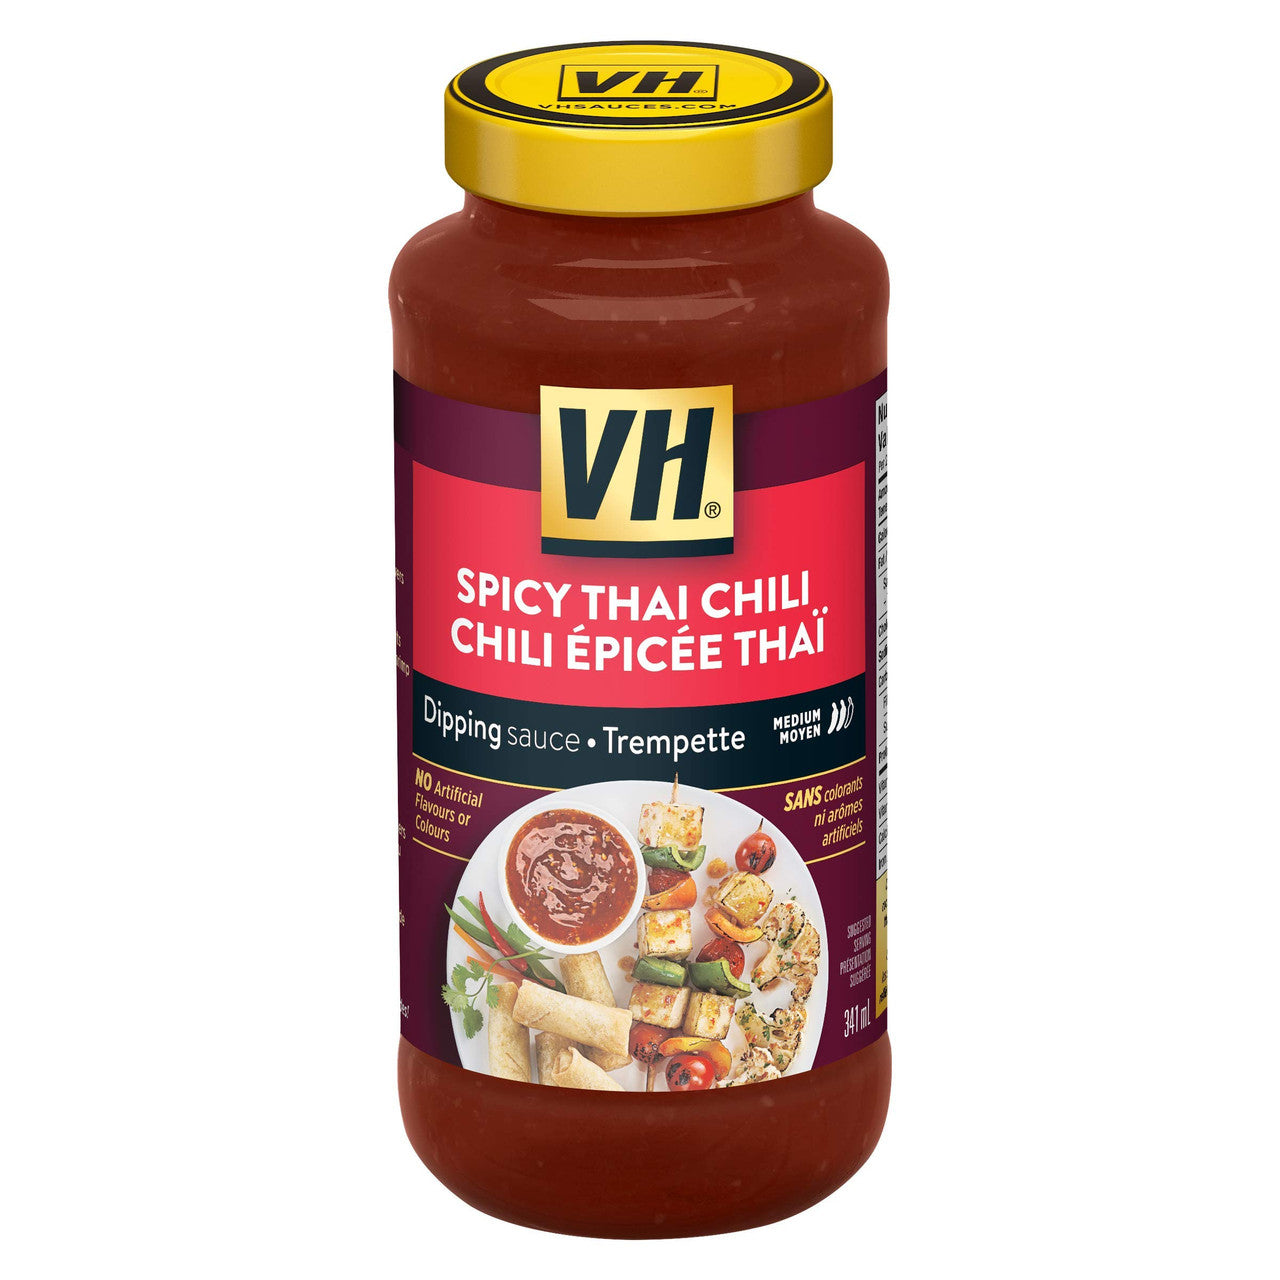 VH Spicy Thai Chili Dipping Sauce (12 Count), 341ml/11.5oz, Jars, {Imported from Canada}